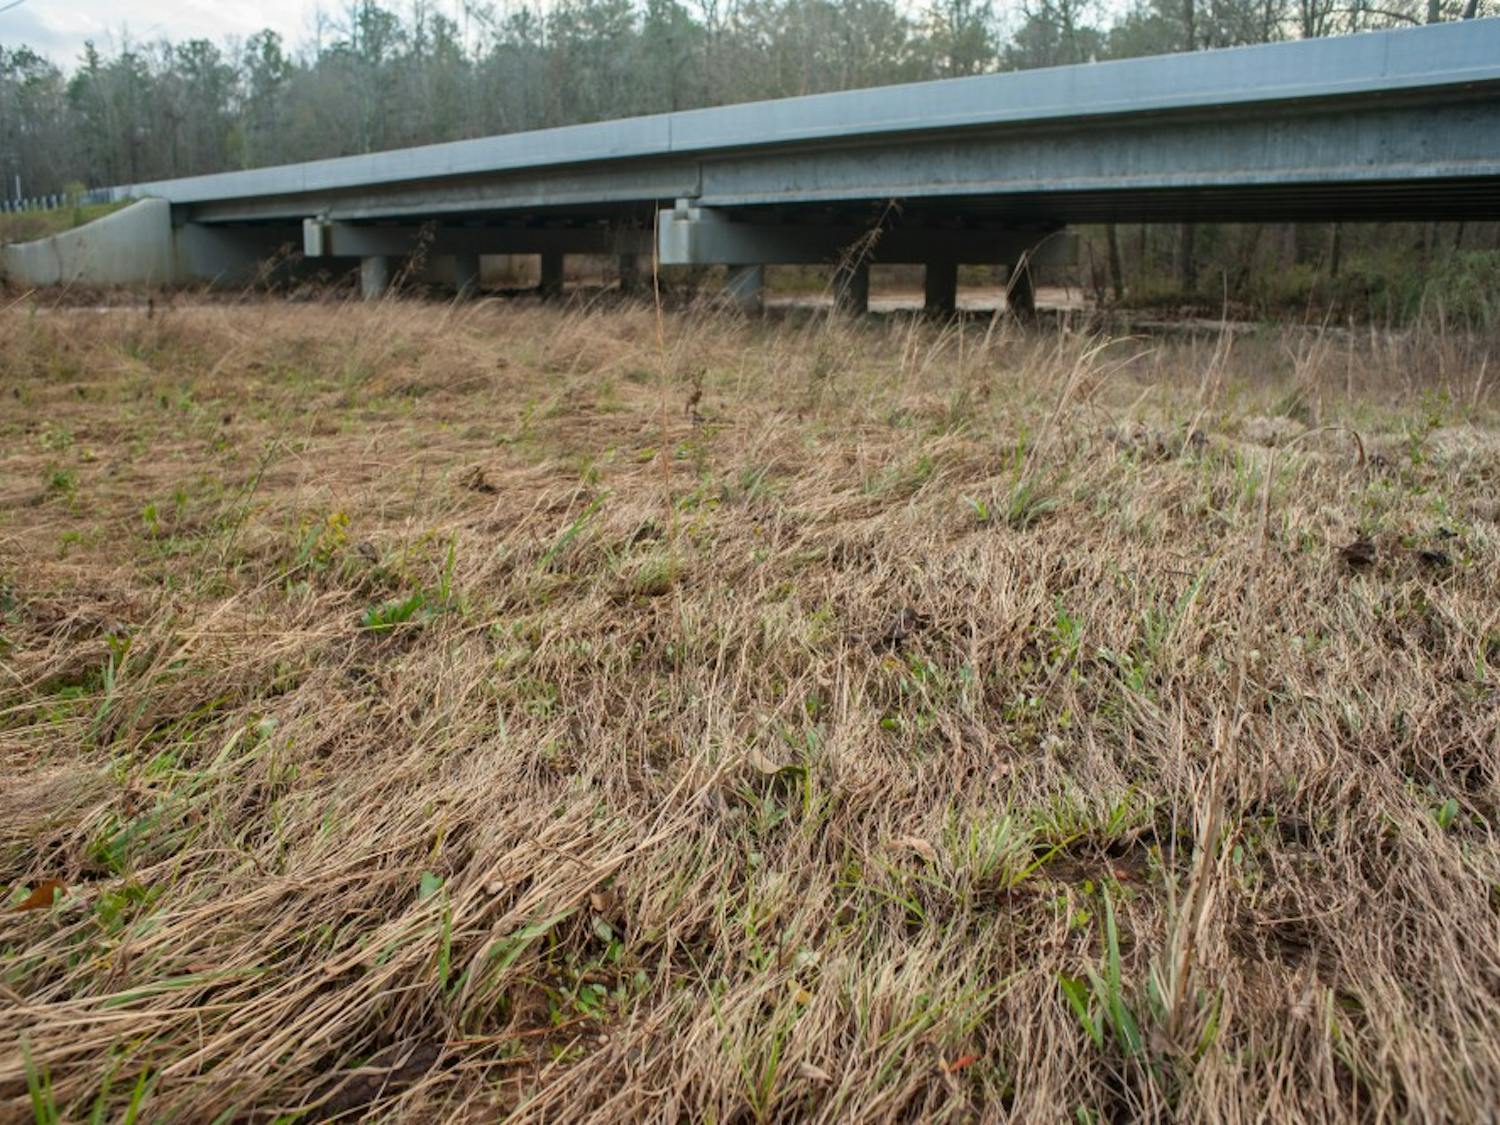 Grass along the banks of Sougahatchee Creek is bent over from flash flood waters that occurred the day before. Friday, Dec. 25, 2015, in Auburn, Alabama.